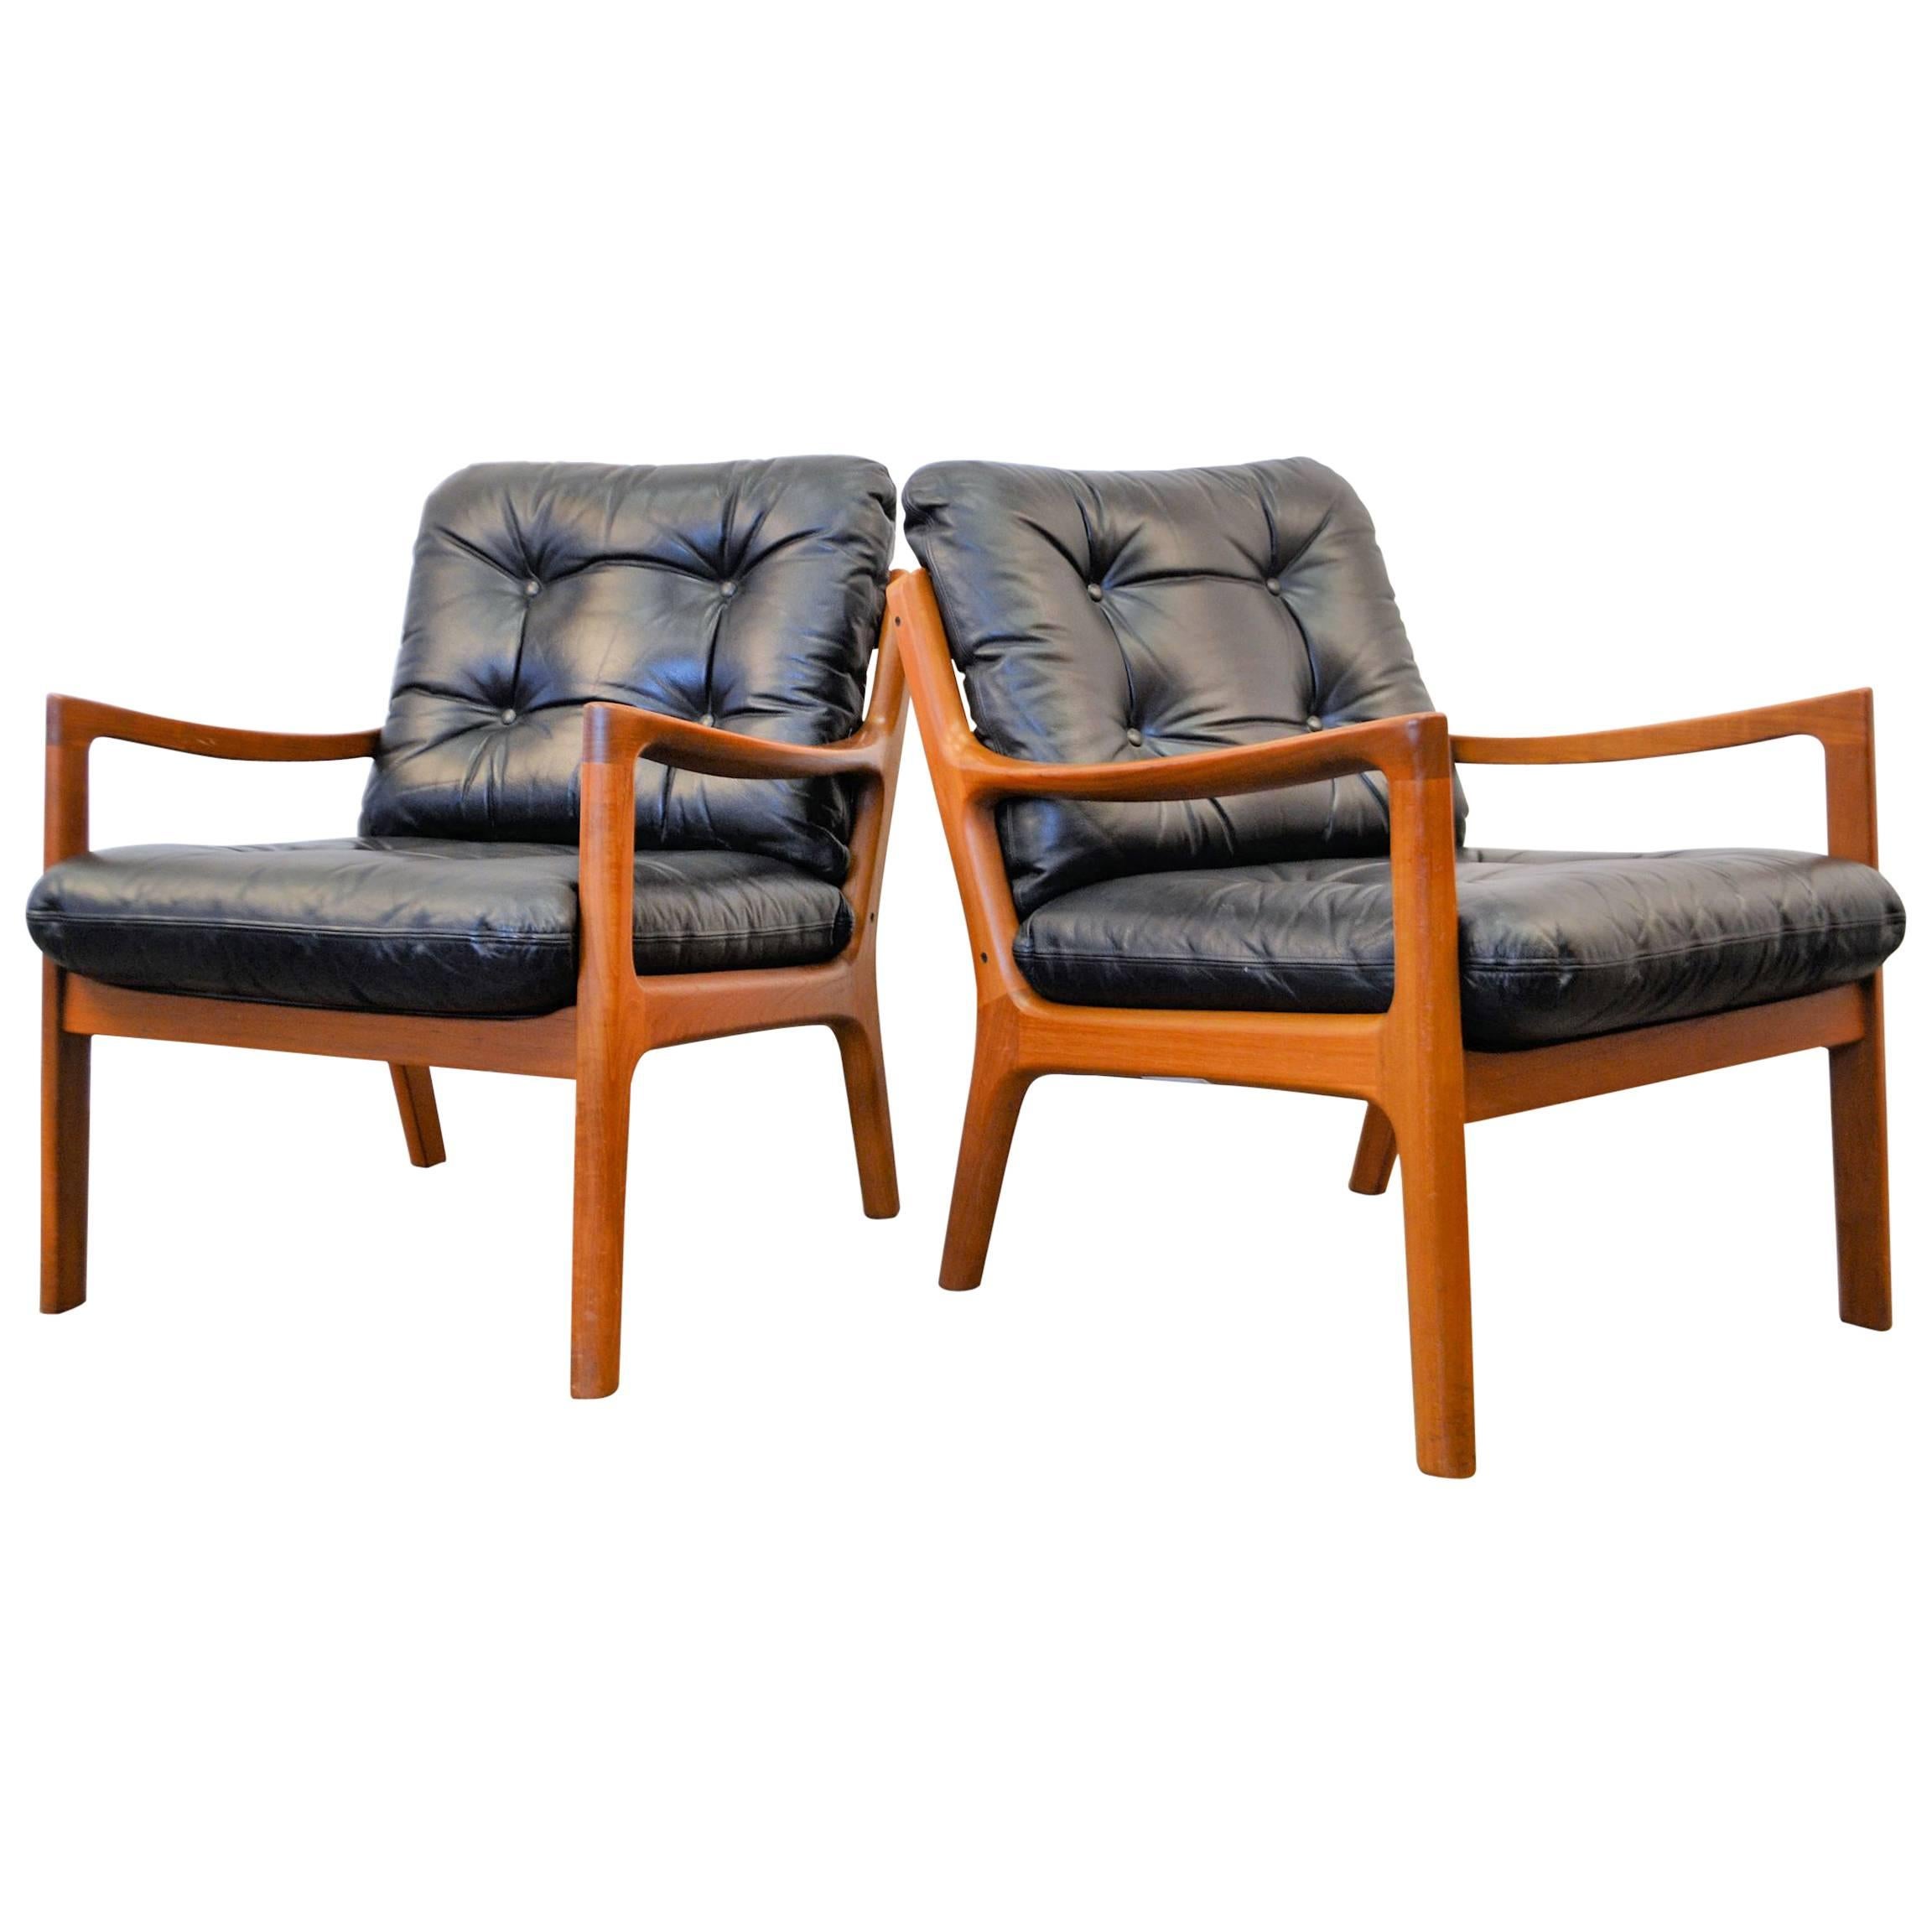 Ole Wanscher Senator Teak Chairs, Set of Two For Sale